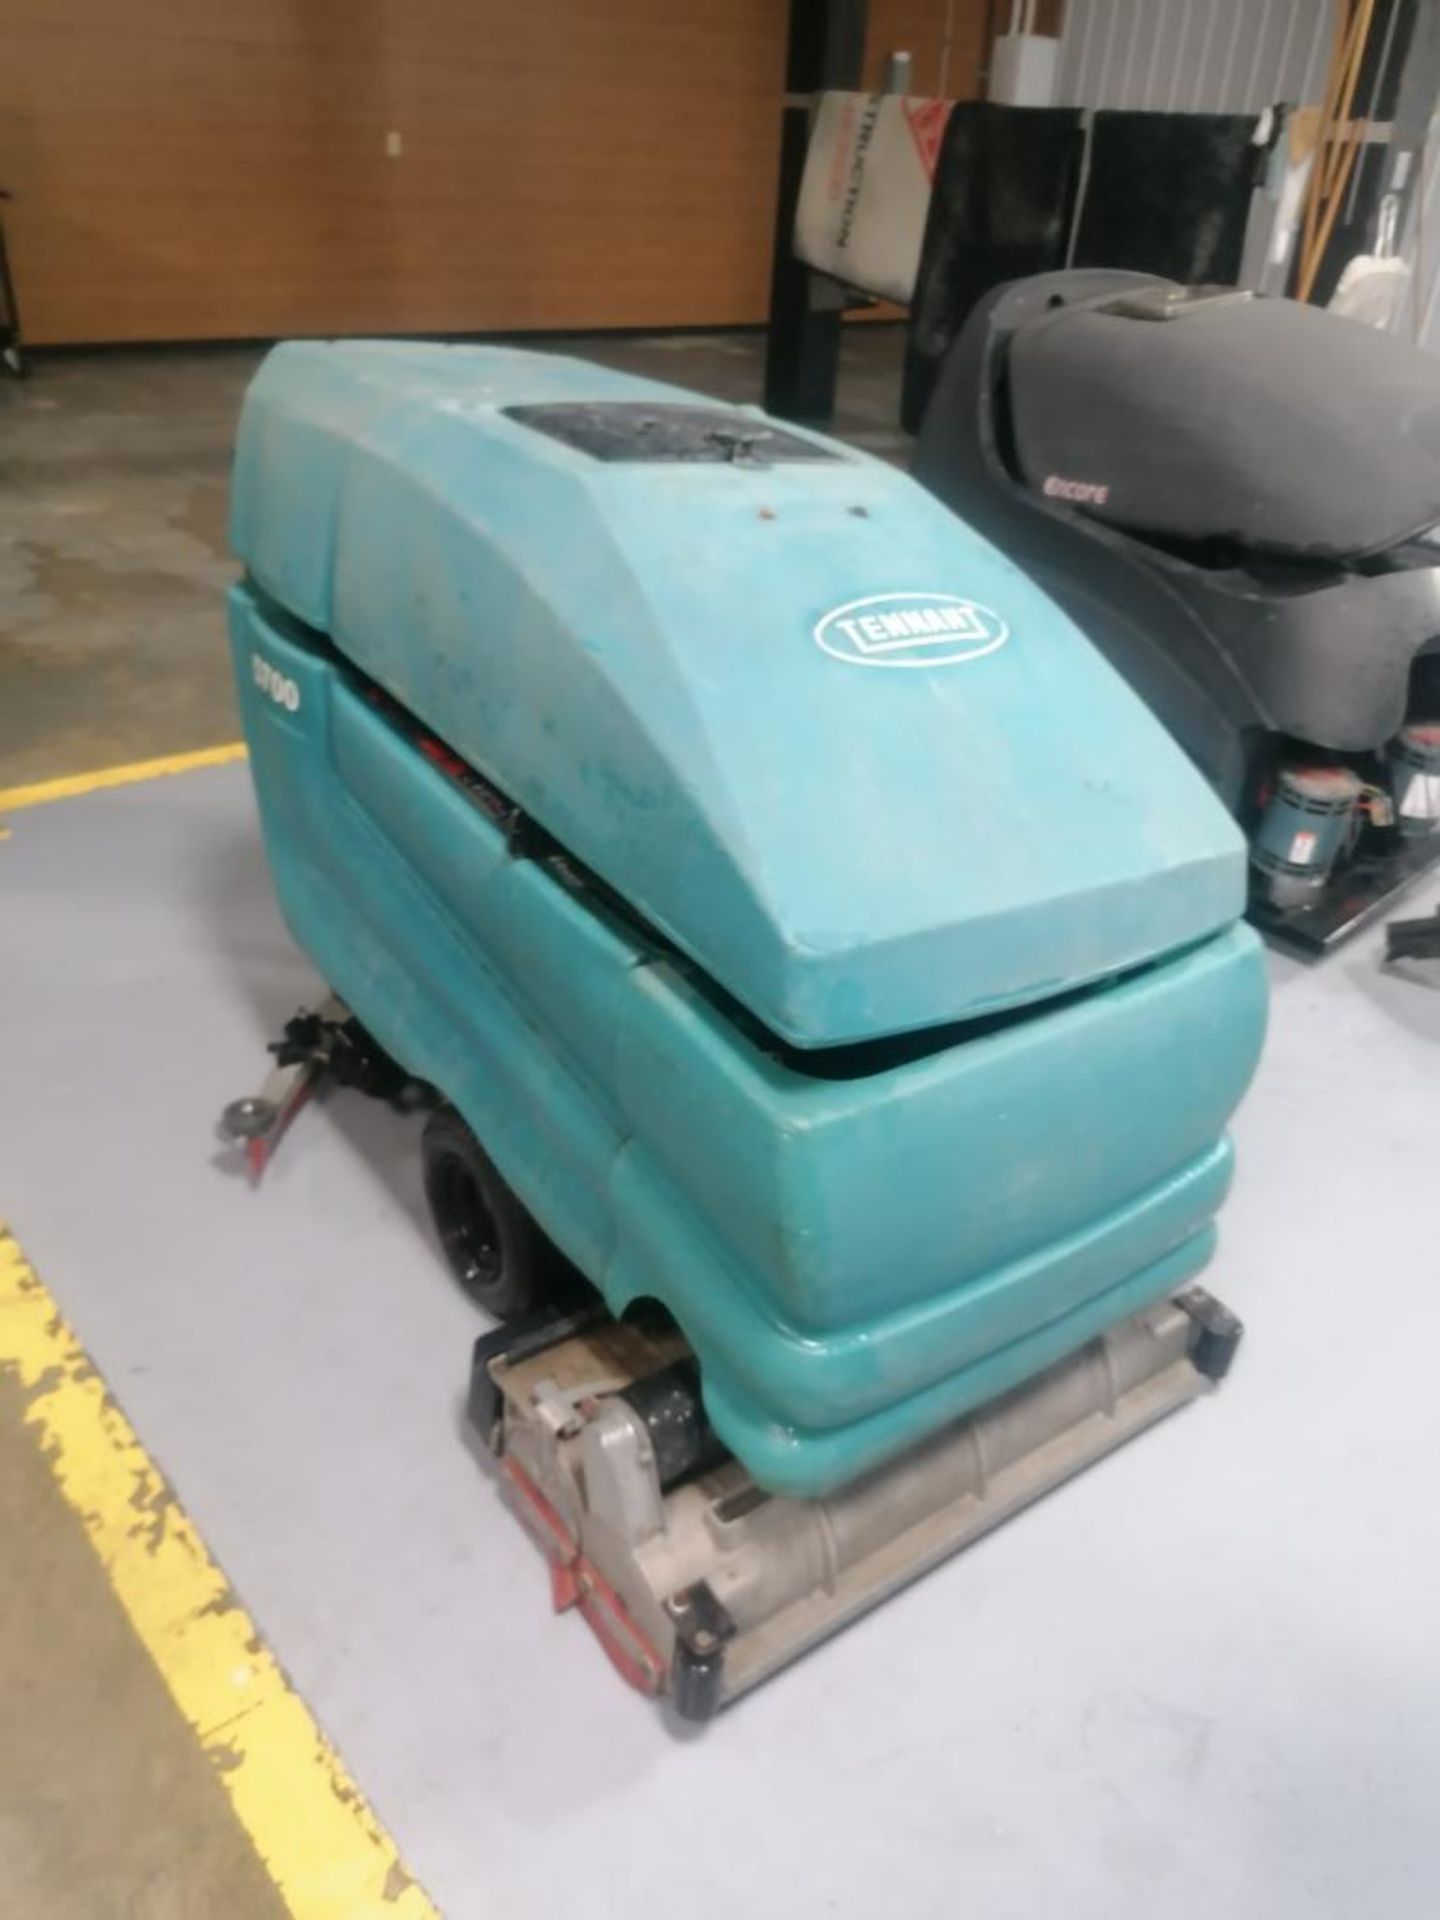 Tennant 5700 Floor Scrubber, Serial #15394, 36 V. Located in Mt. Pleasant, IA. - Image 2 of 16